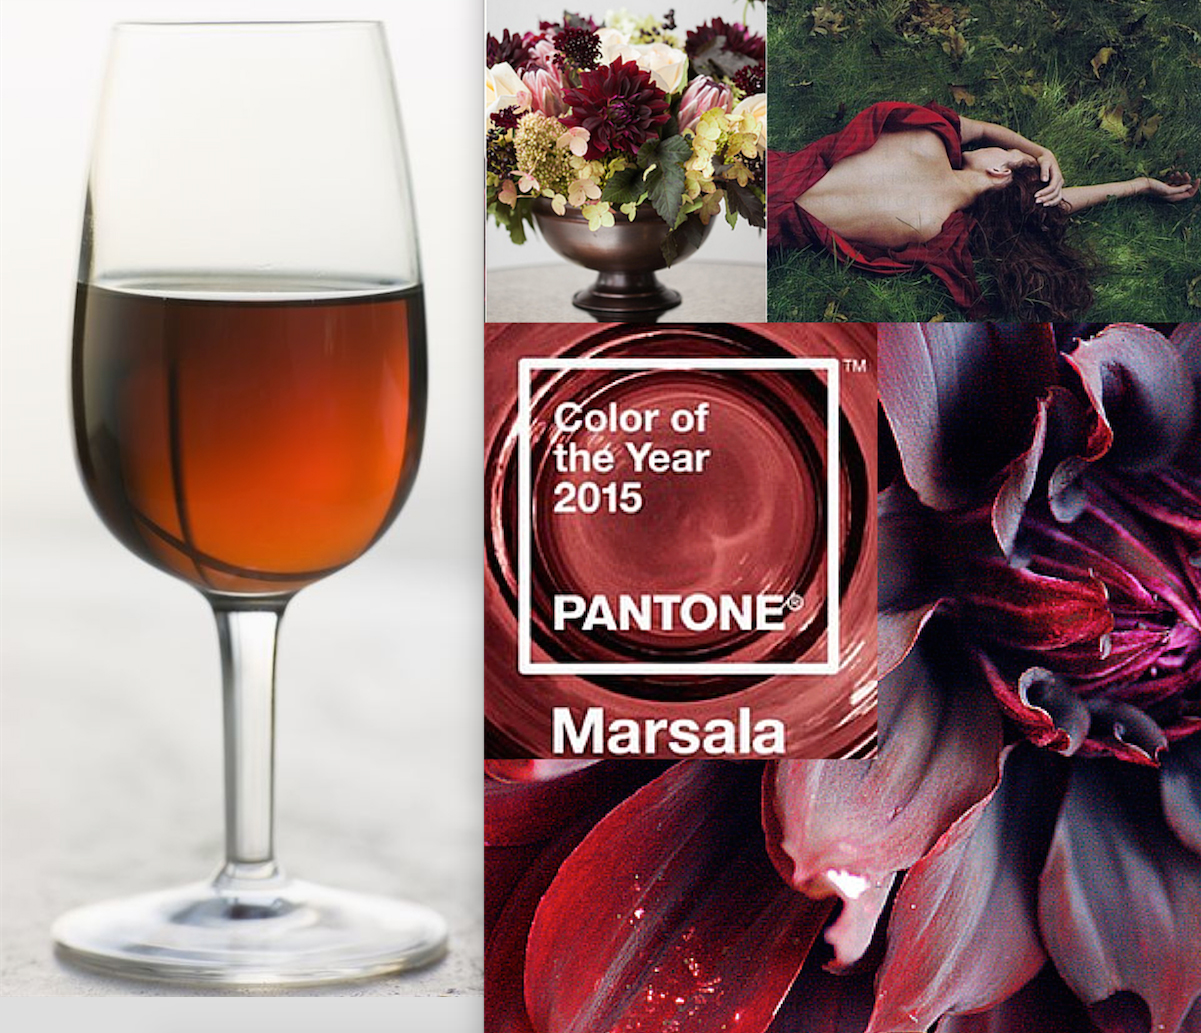 Marsala-Pantone Color of the Year 2015